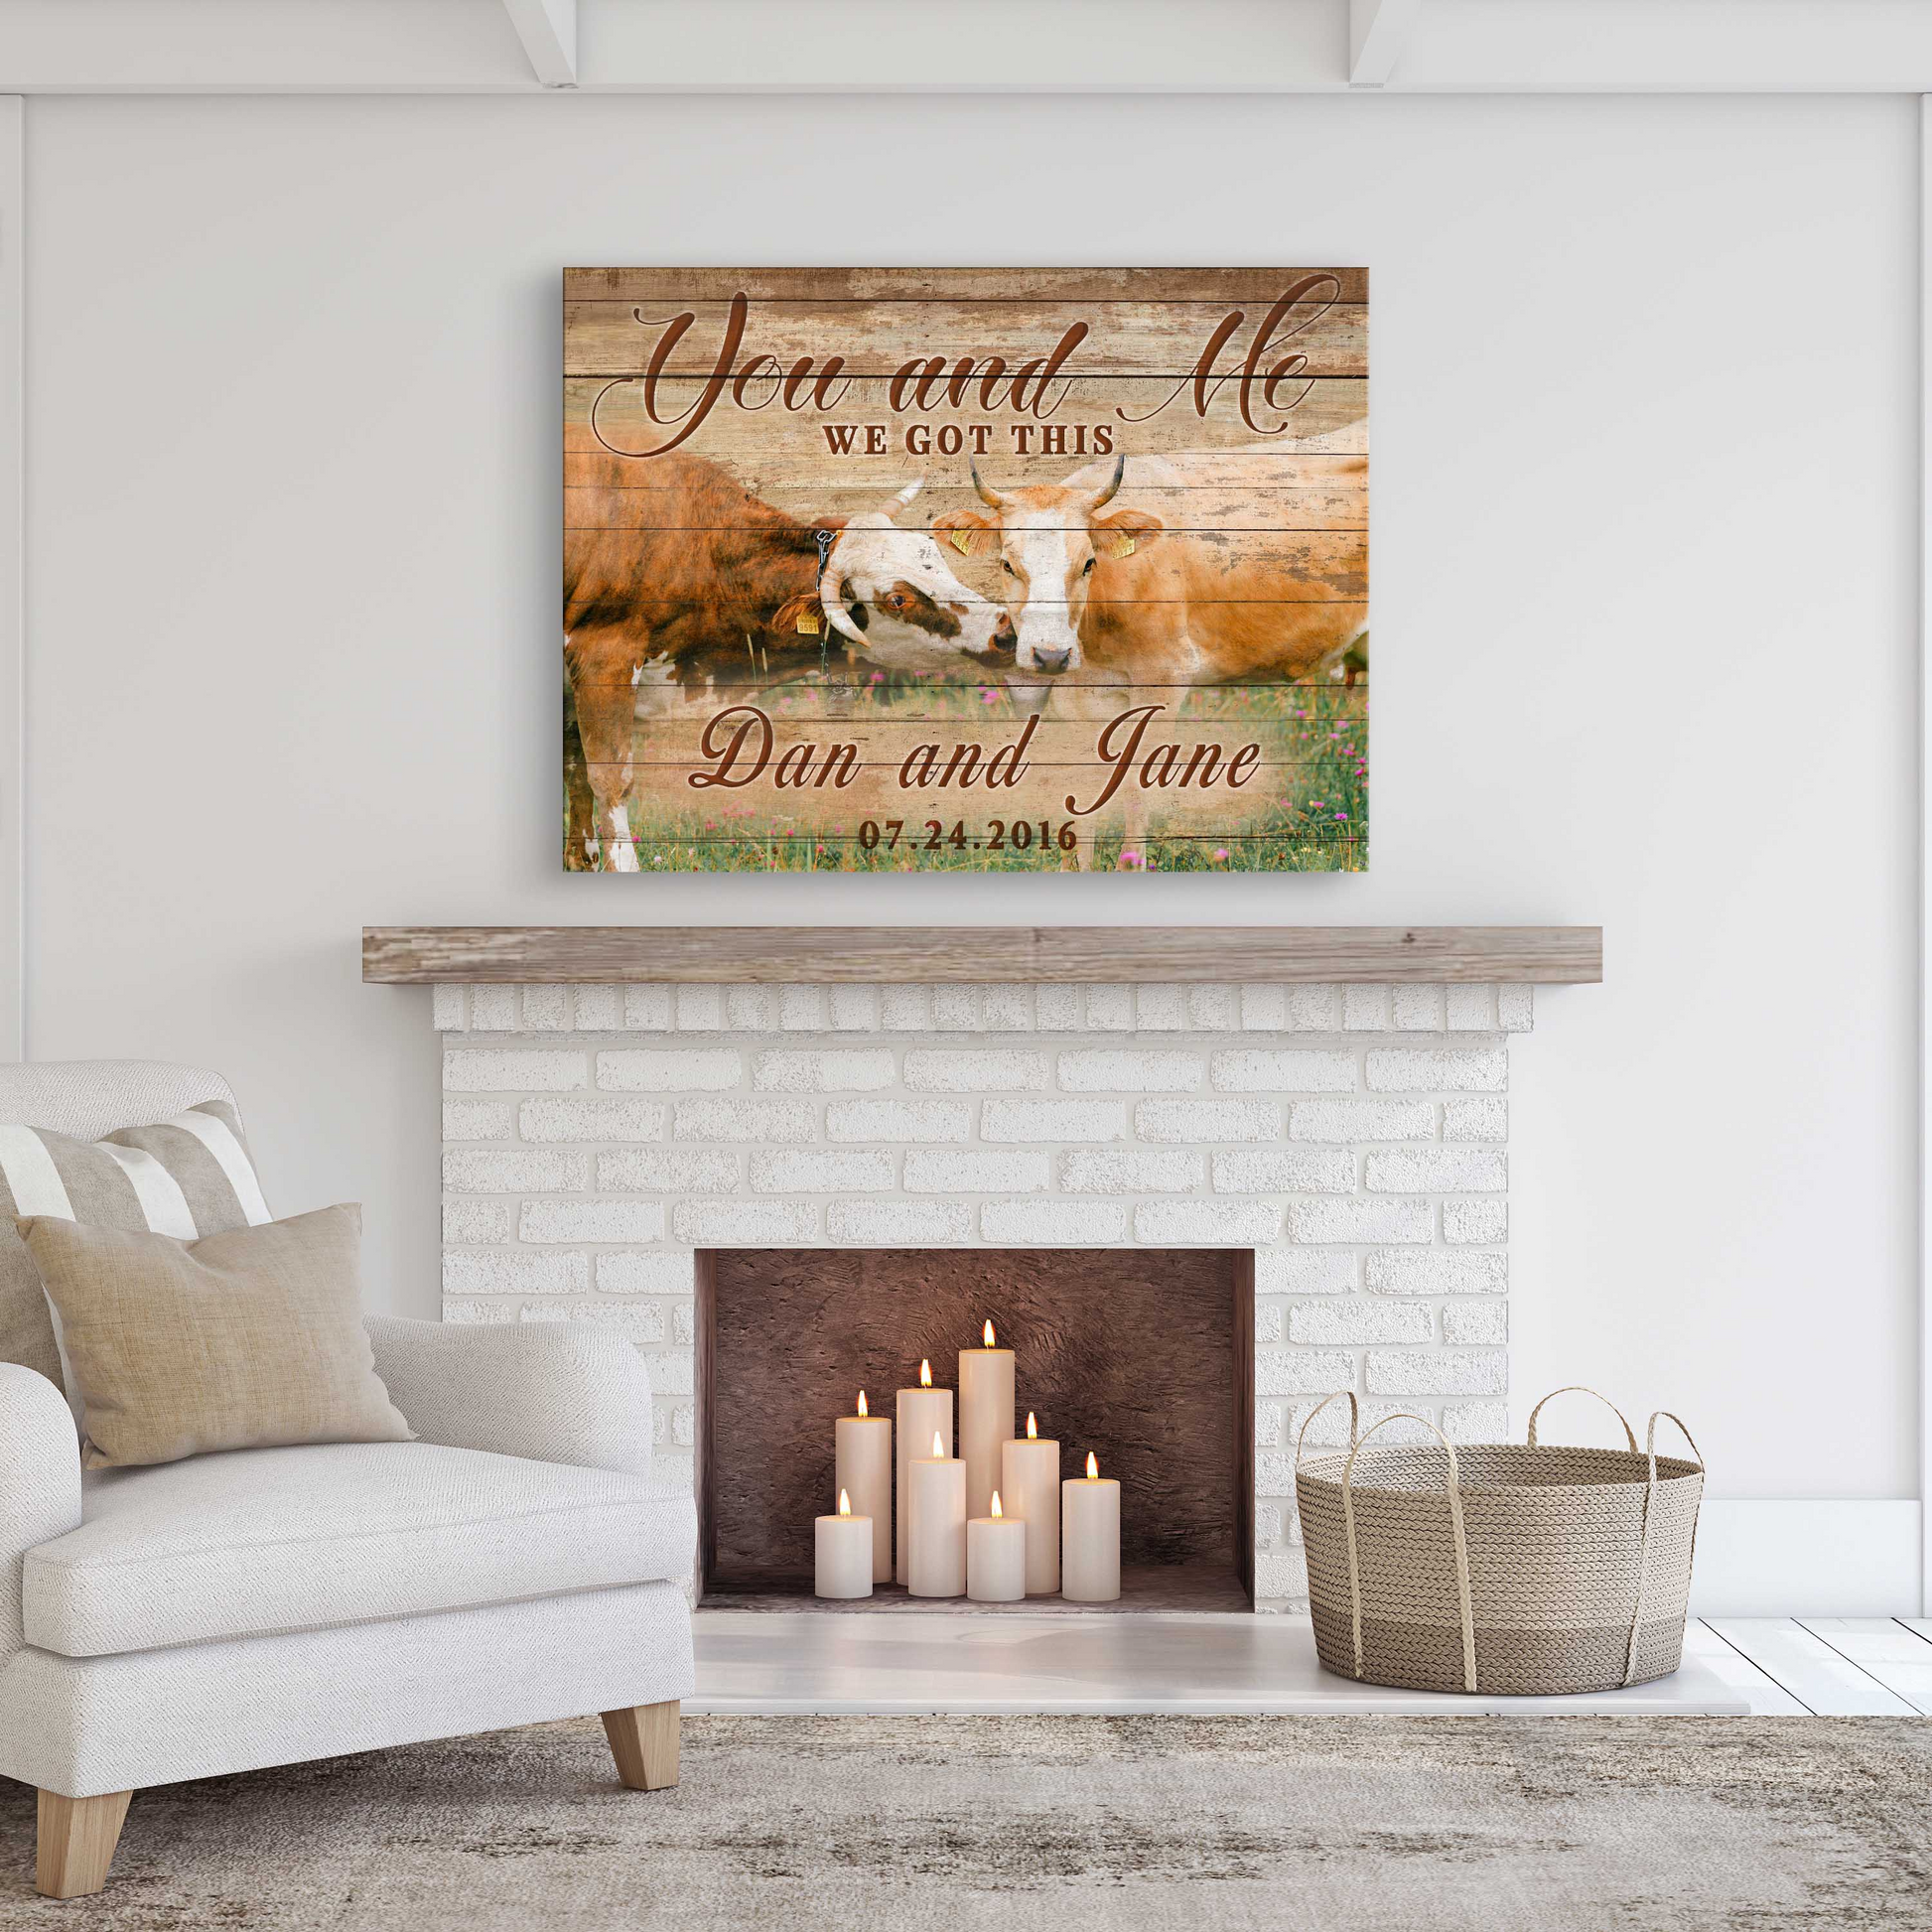 We Got This Couple Cattle Sign - Image by Tailored Canvases